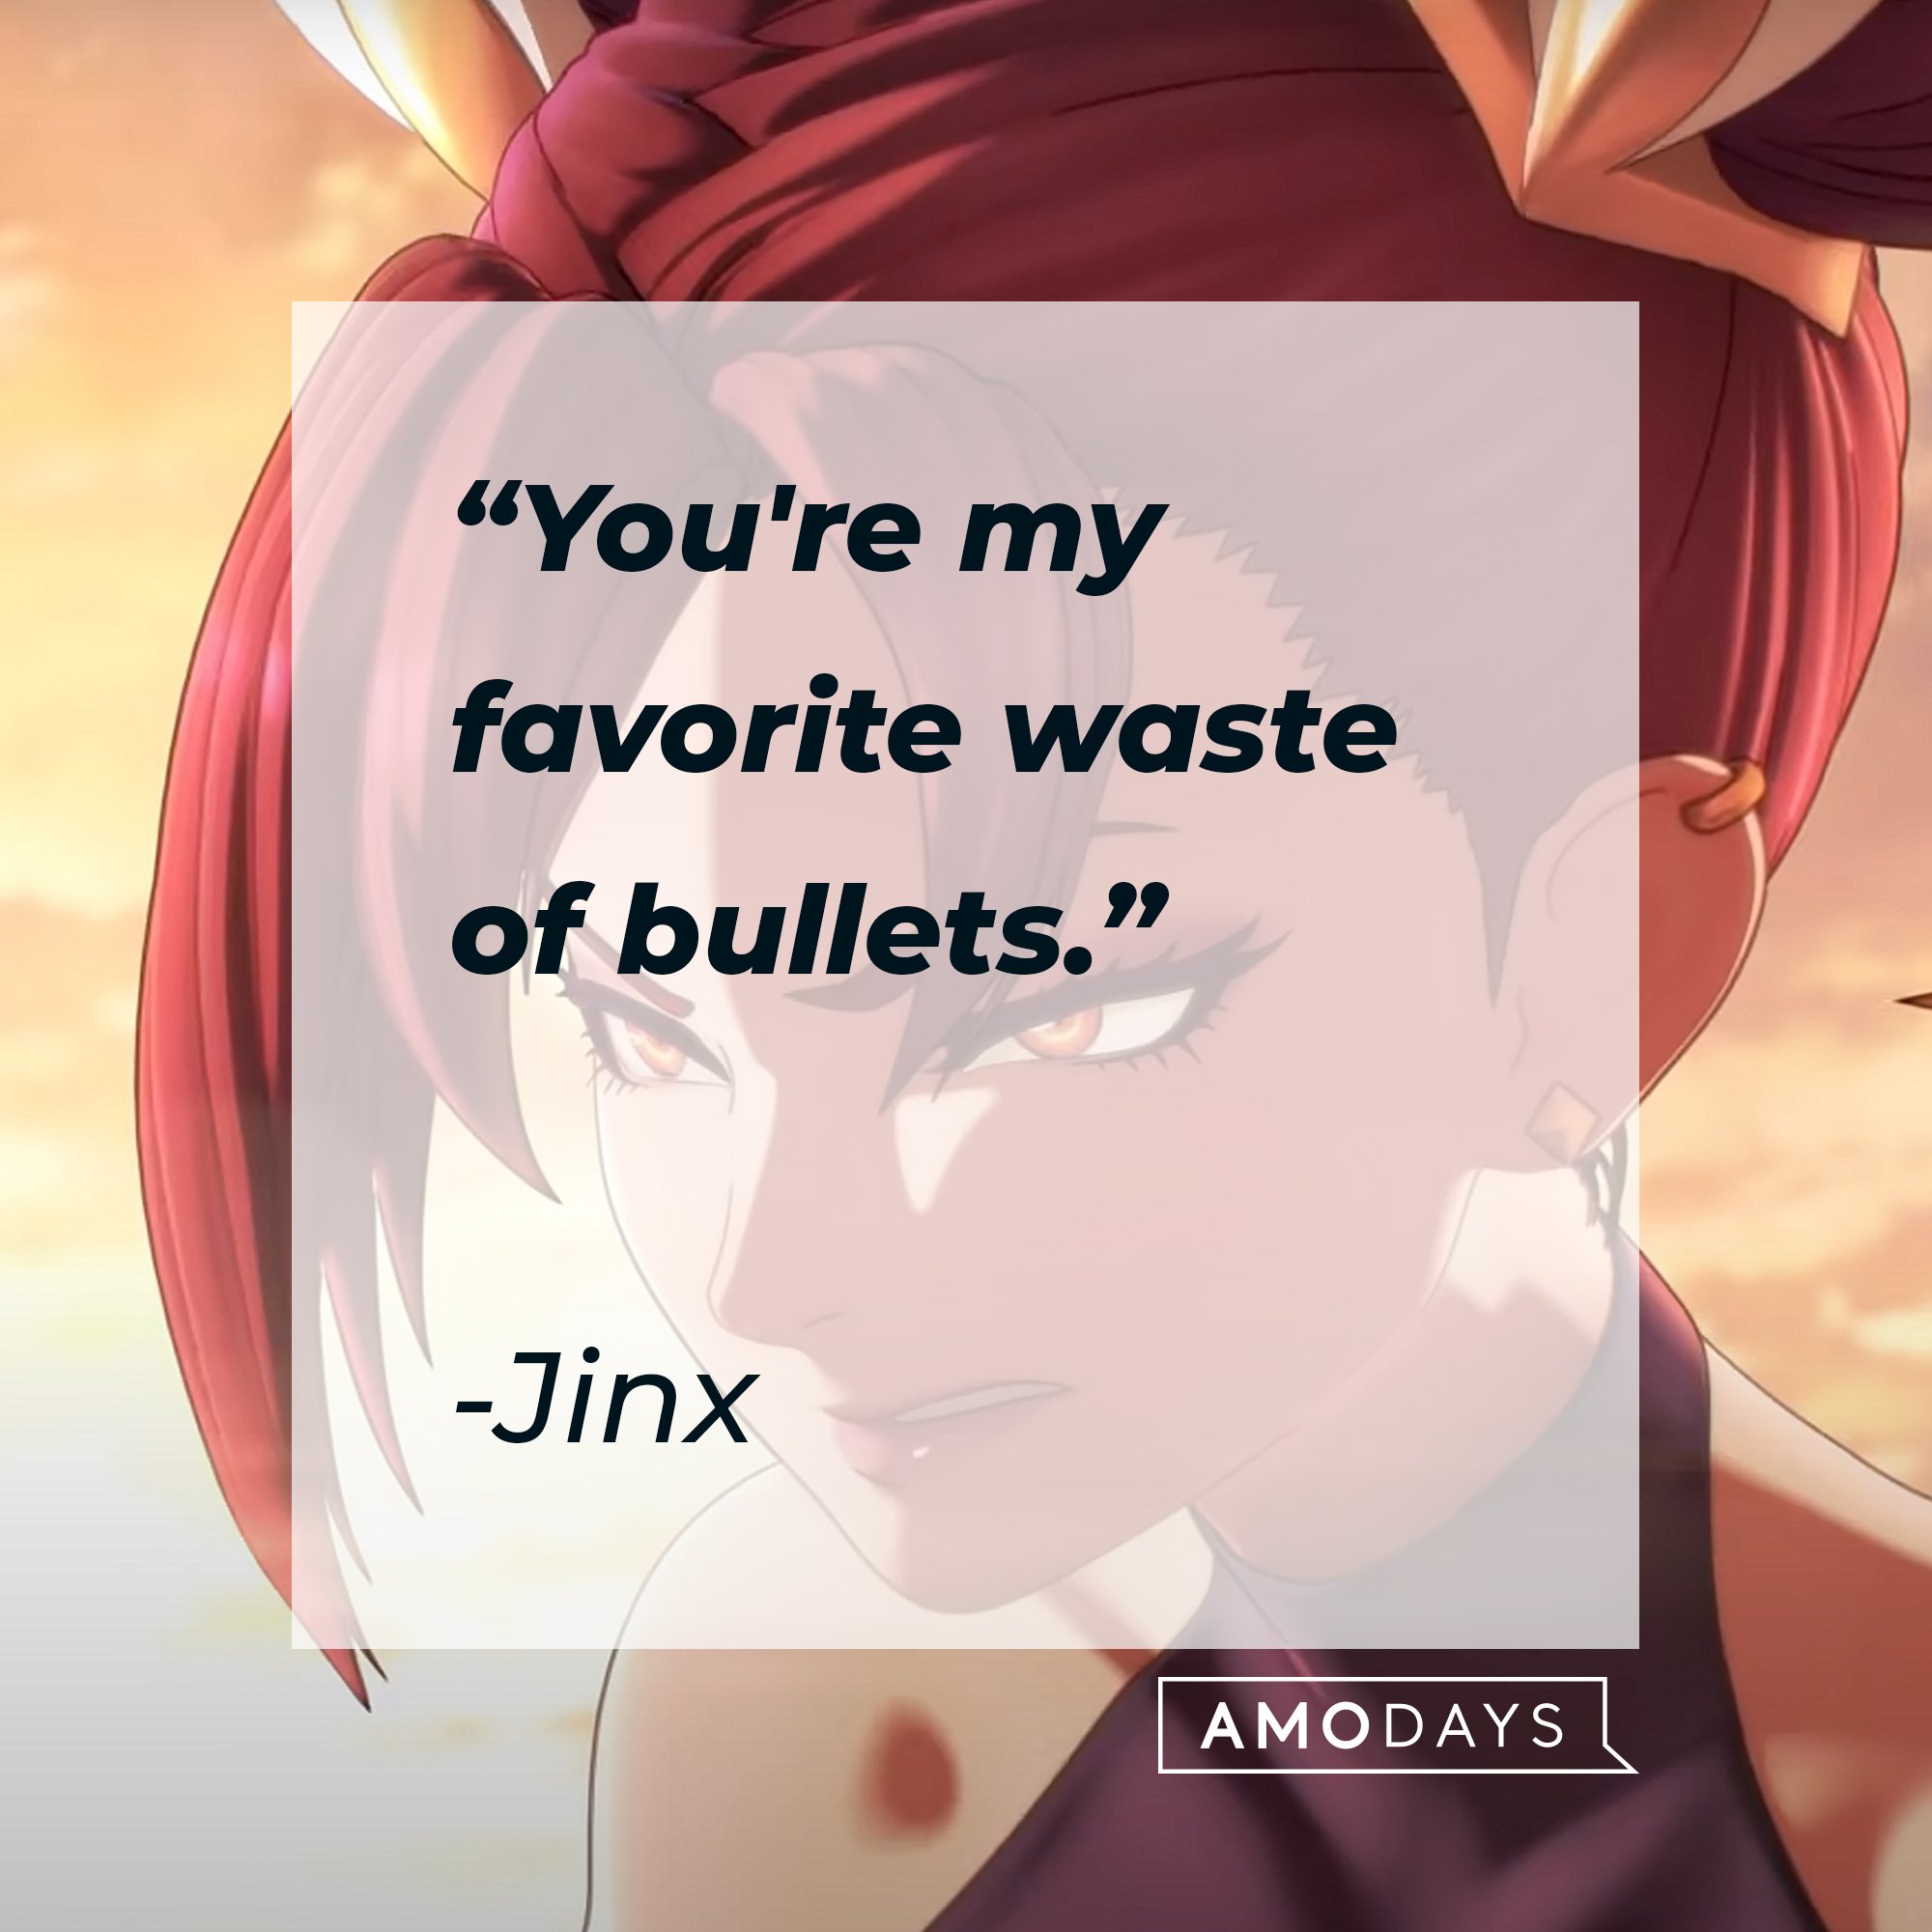 Jinx's quote: "You're my favorite waste of bullets." | Image: AmoDays